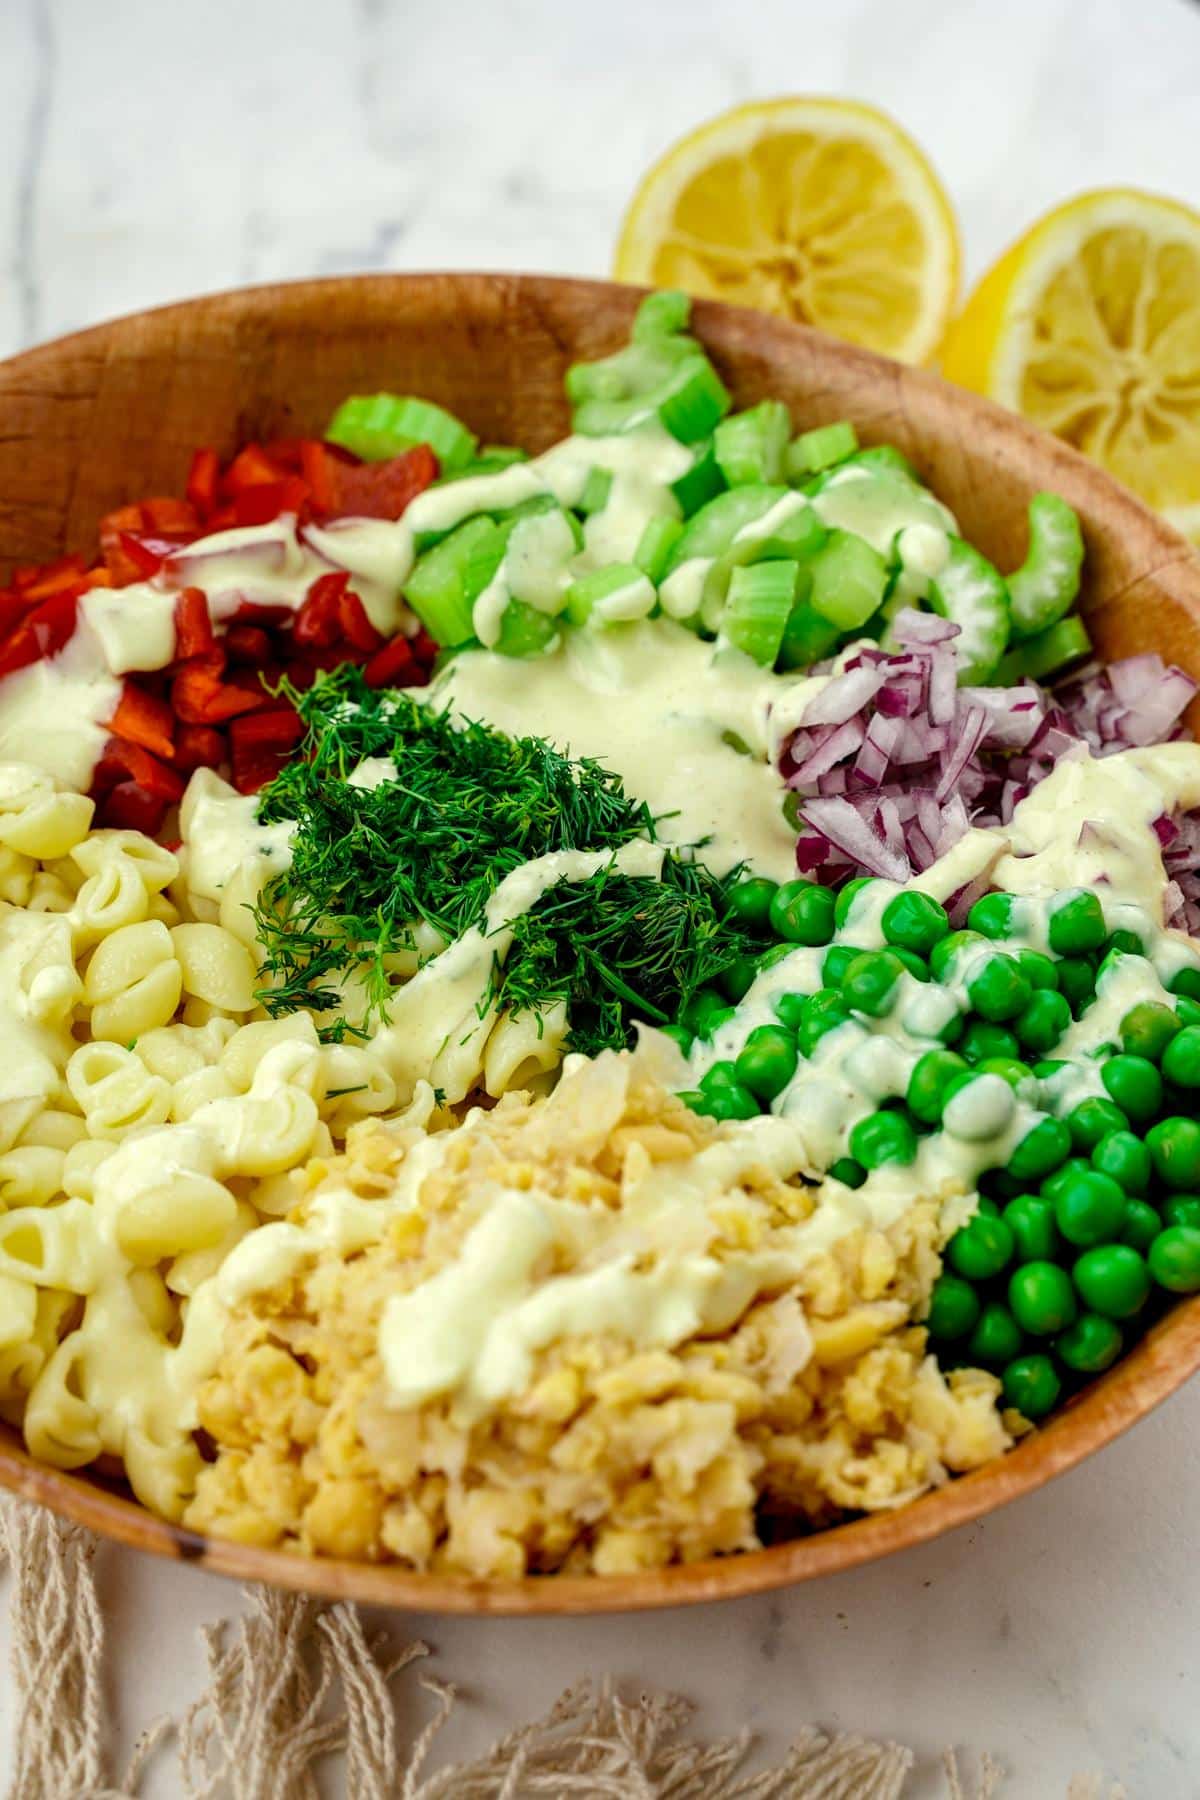 wood bowl of pasta with vegetables and dressing drizzled over the top